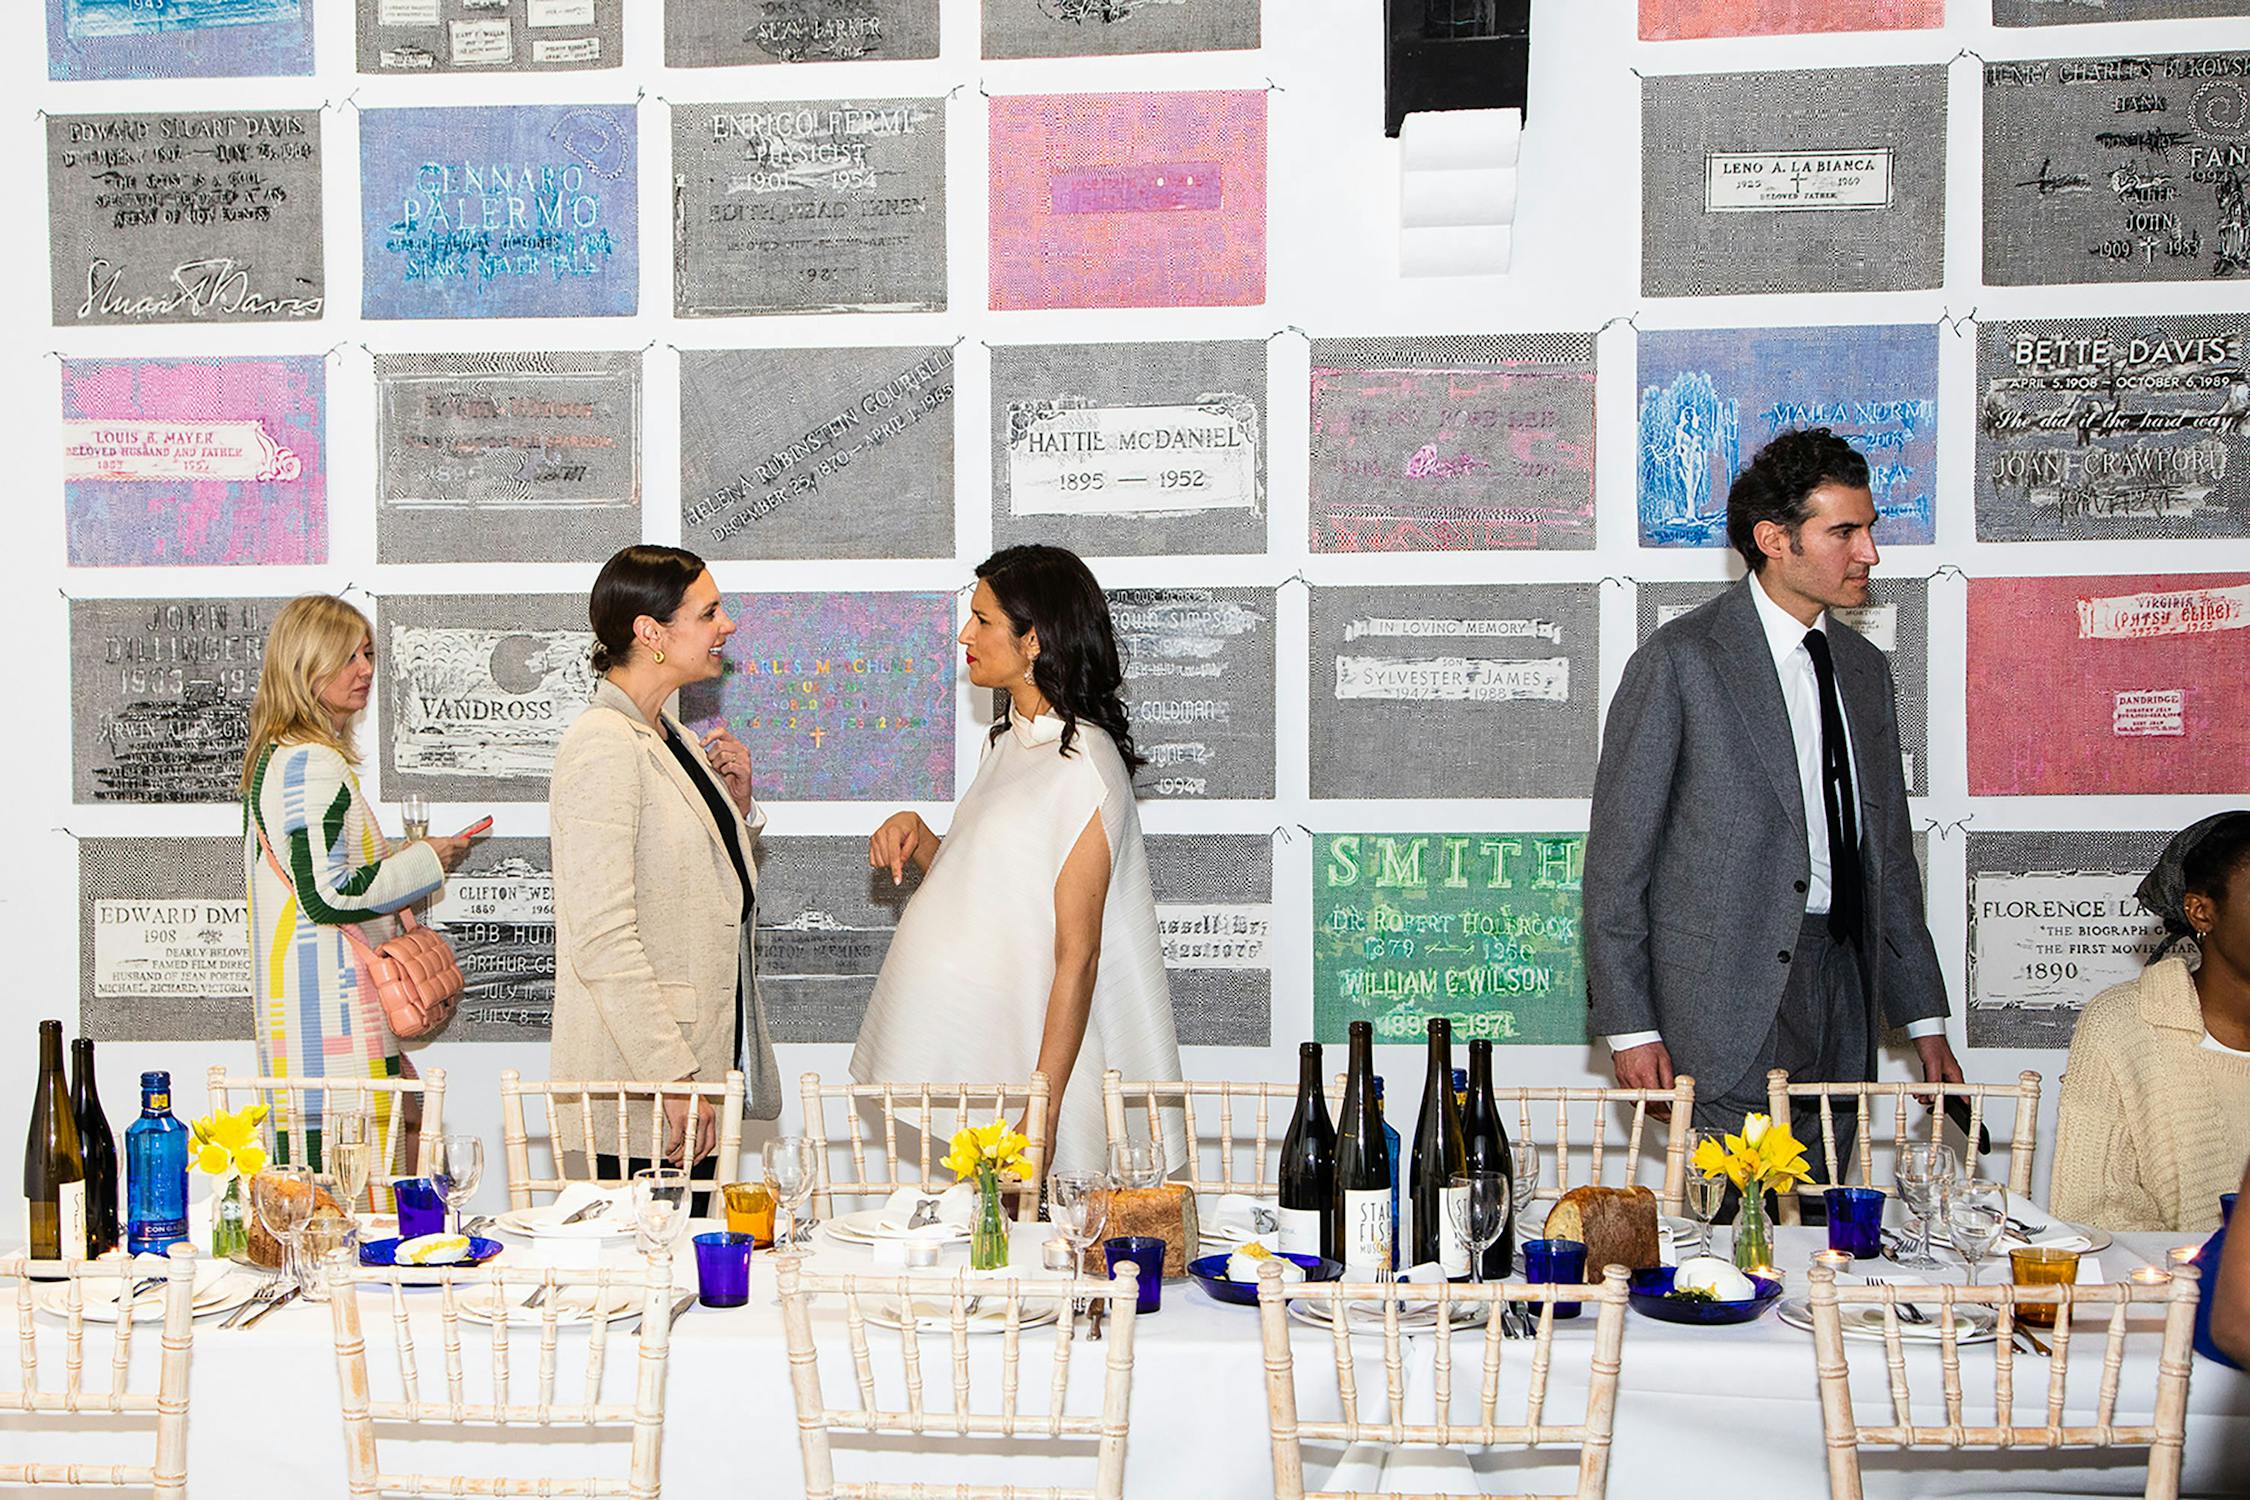 Dinner party guests speaking to one another at a long table with a white table cloth, bottles of wine, small bouquets of flowers. the quests stand in front of a wall adorned with colourful square artworks.